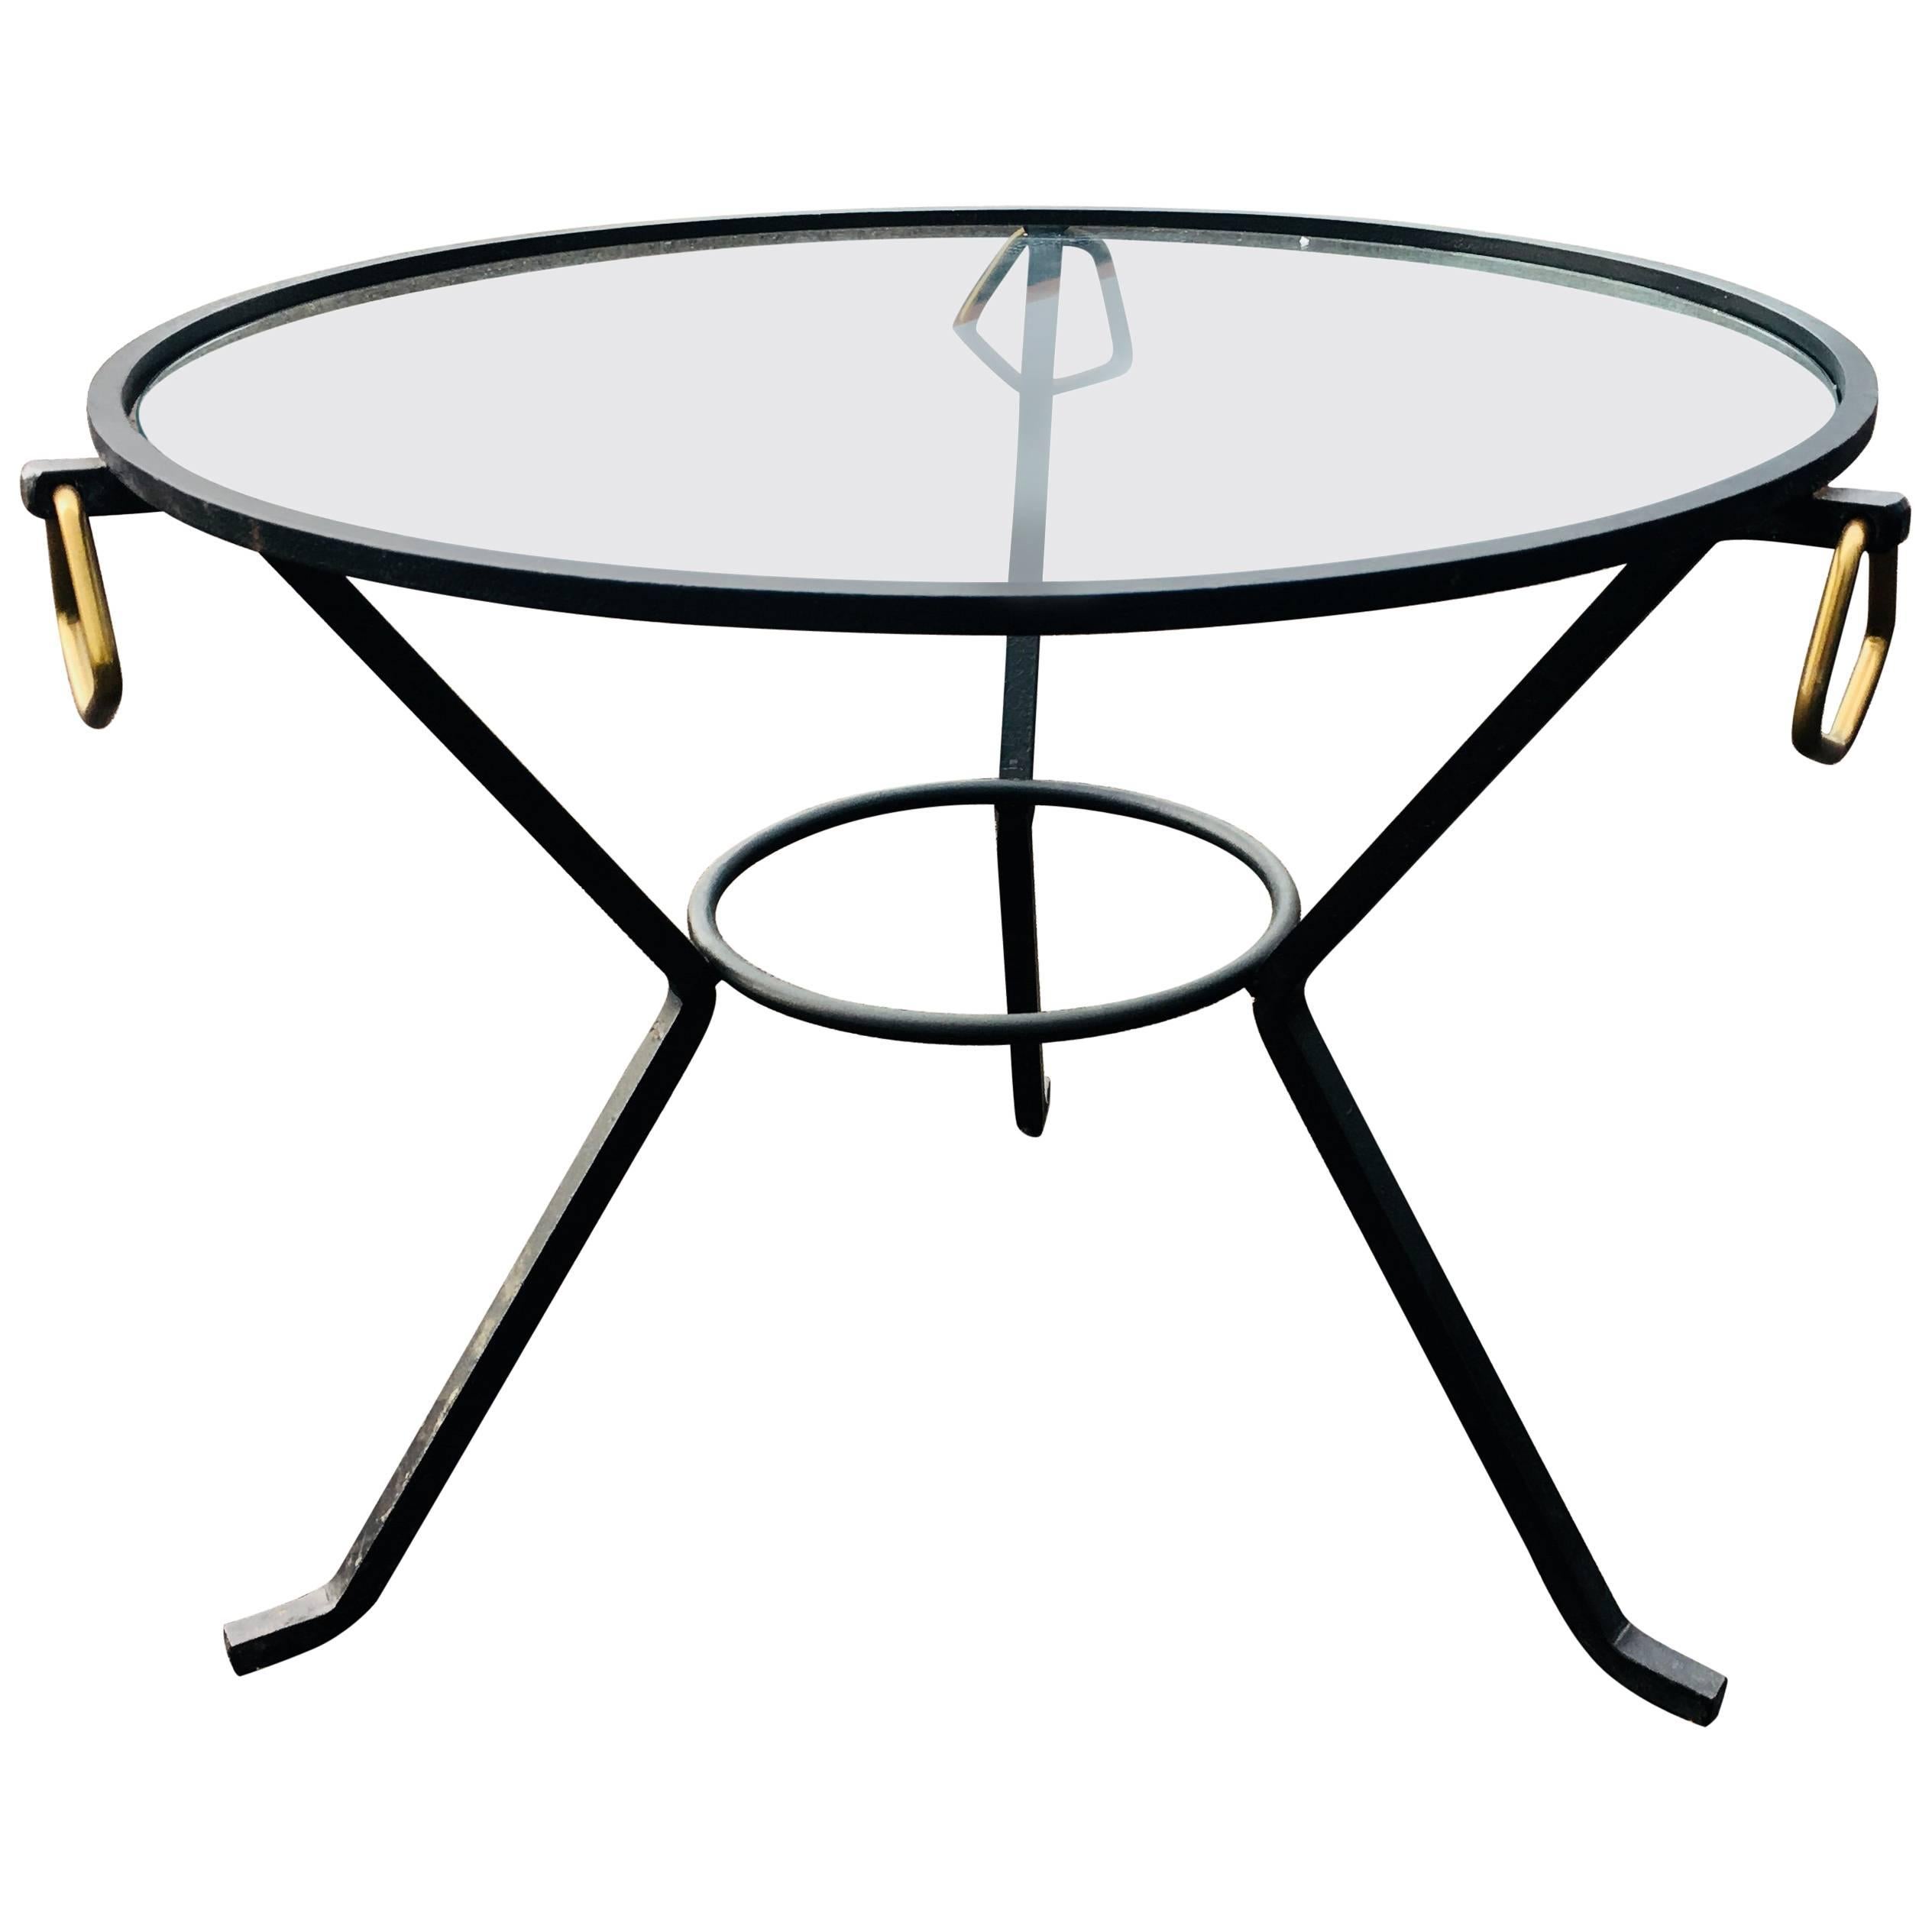 Glass and Metal Round Coffee Table in the Manner of Jacques Adnet